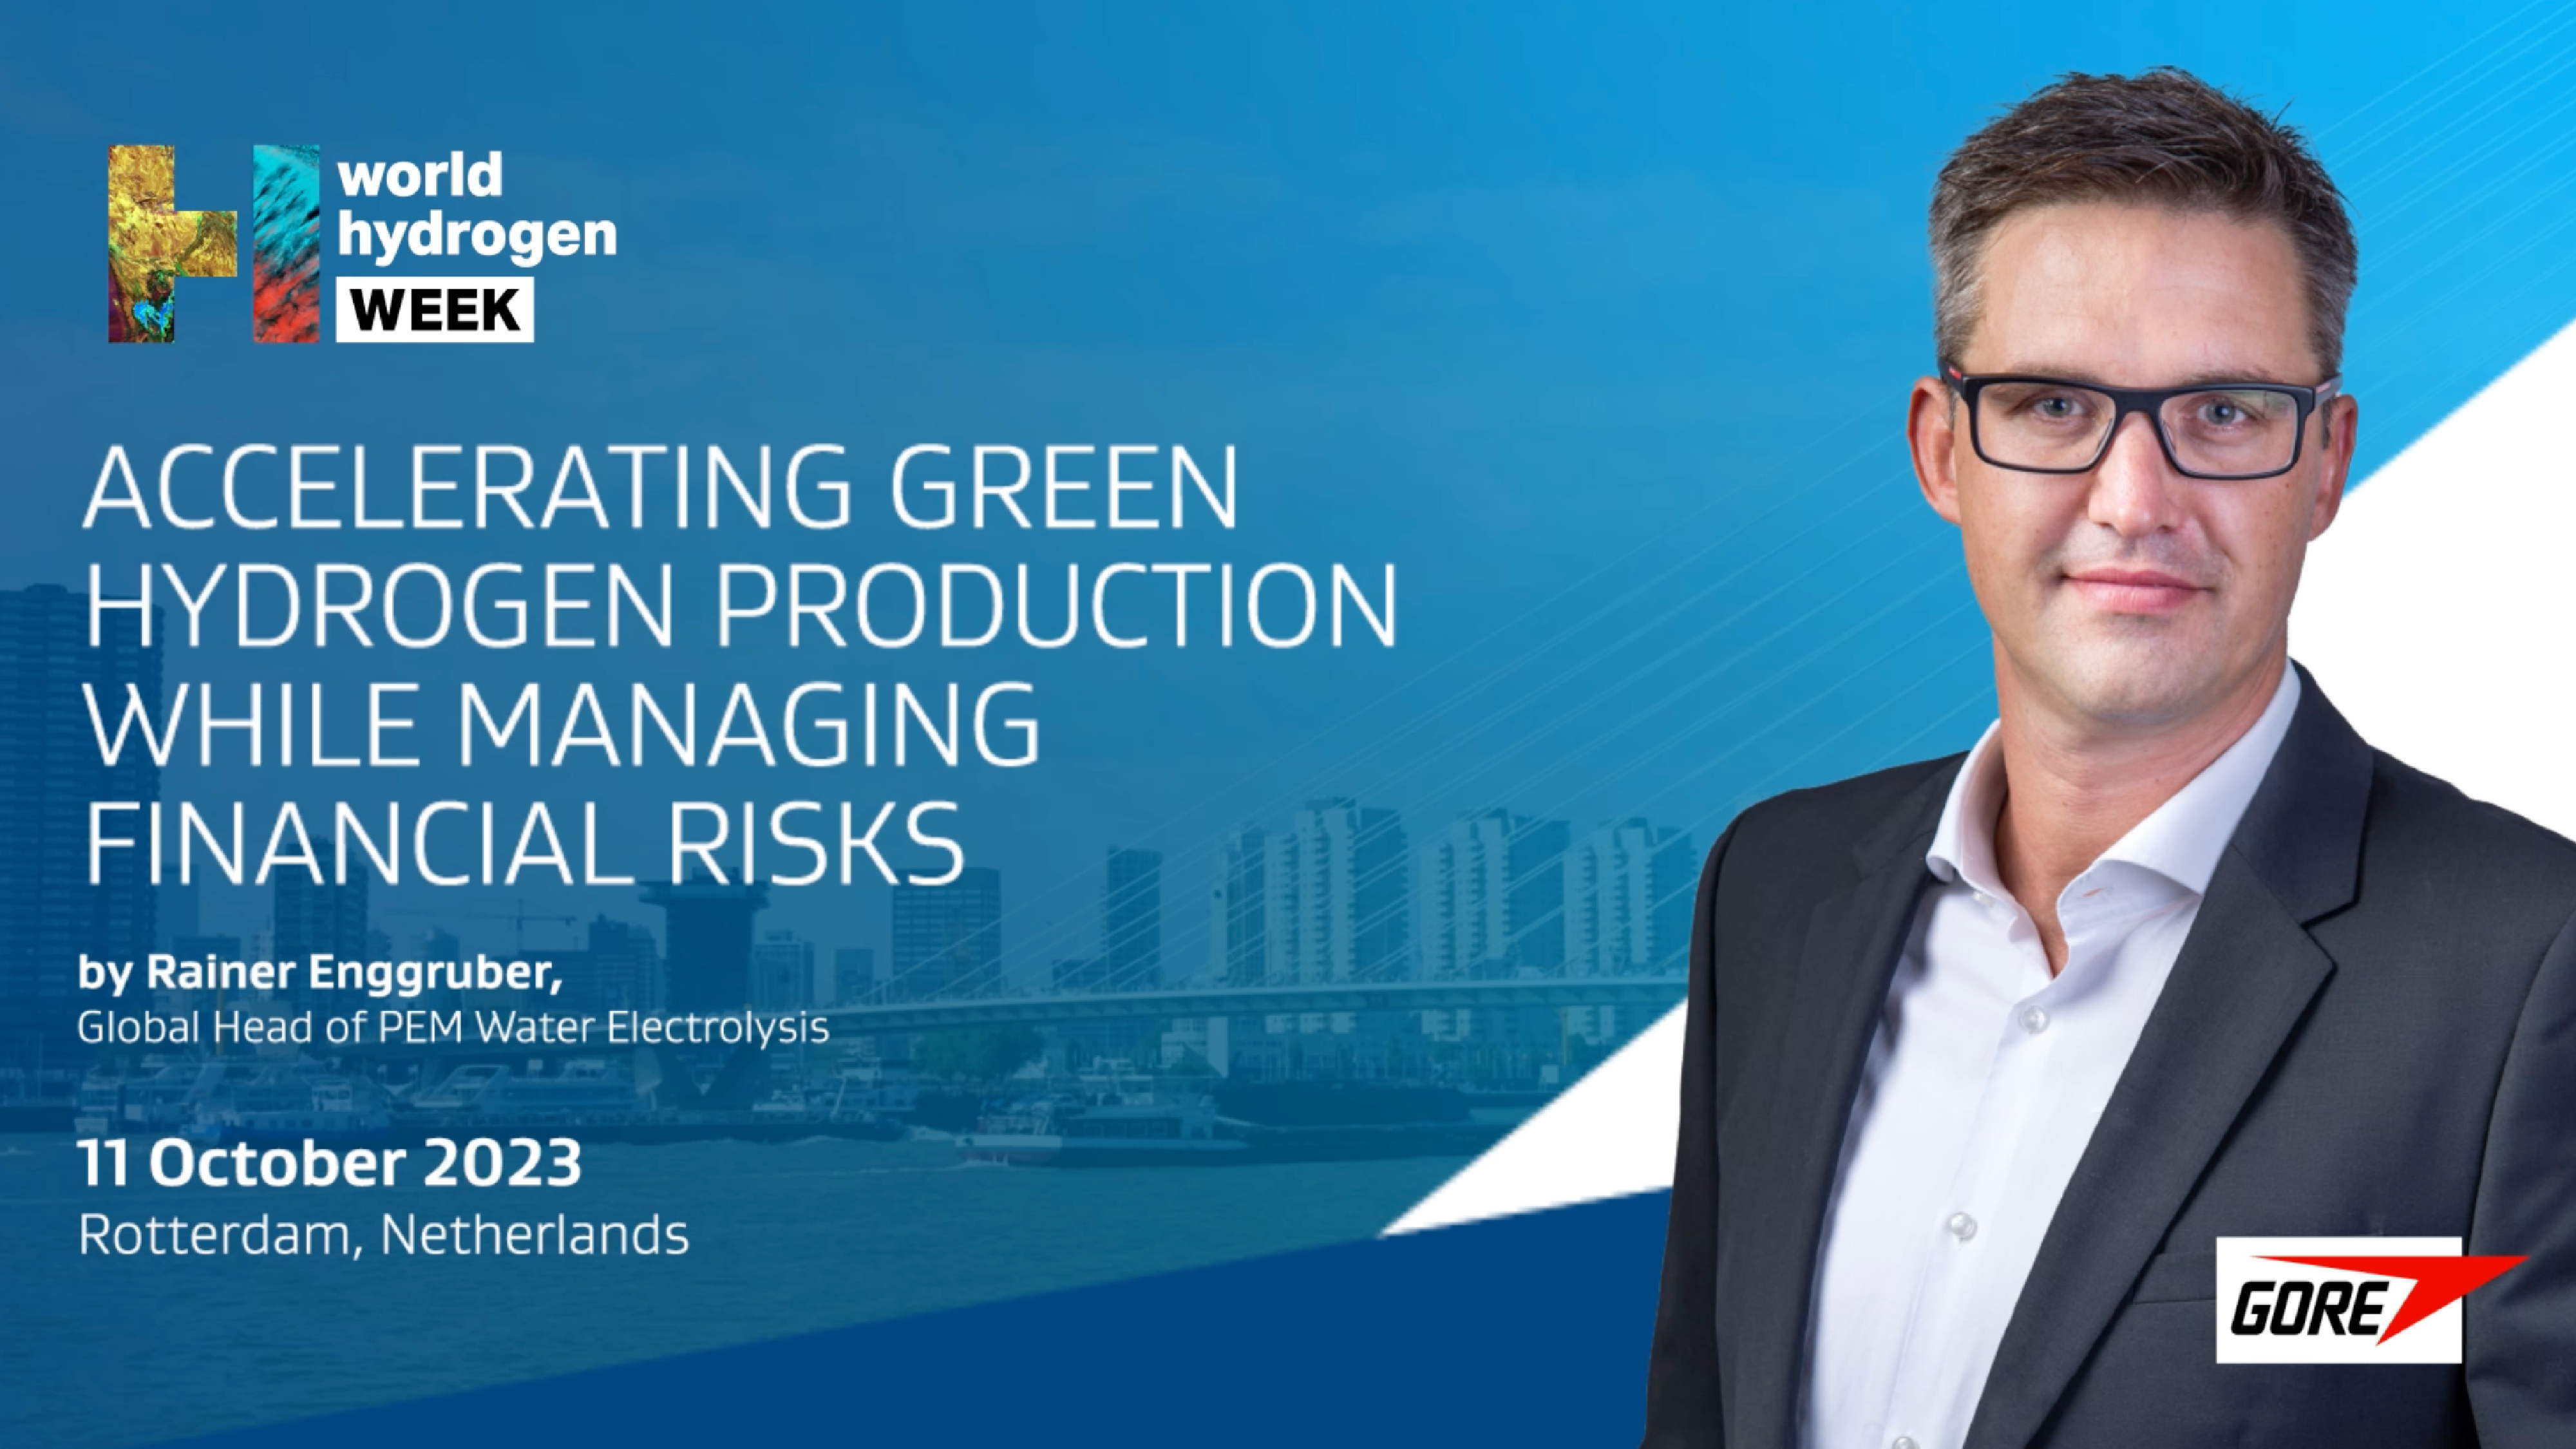 Accelerating Green Hydrogen Production While Managing Financial Risks by Rainer Enggruber - 11 October 2023 - Rotterdam, Netherlands